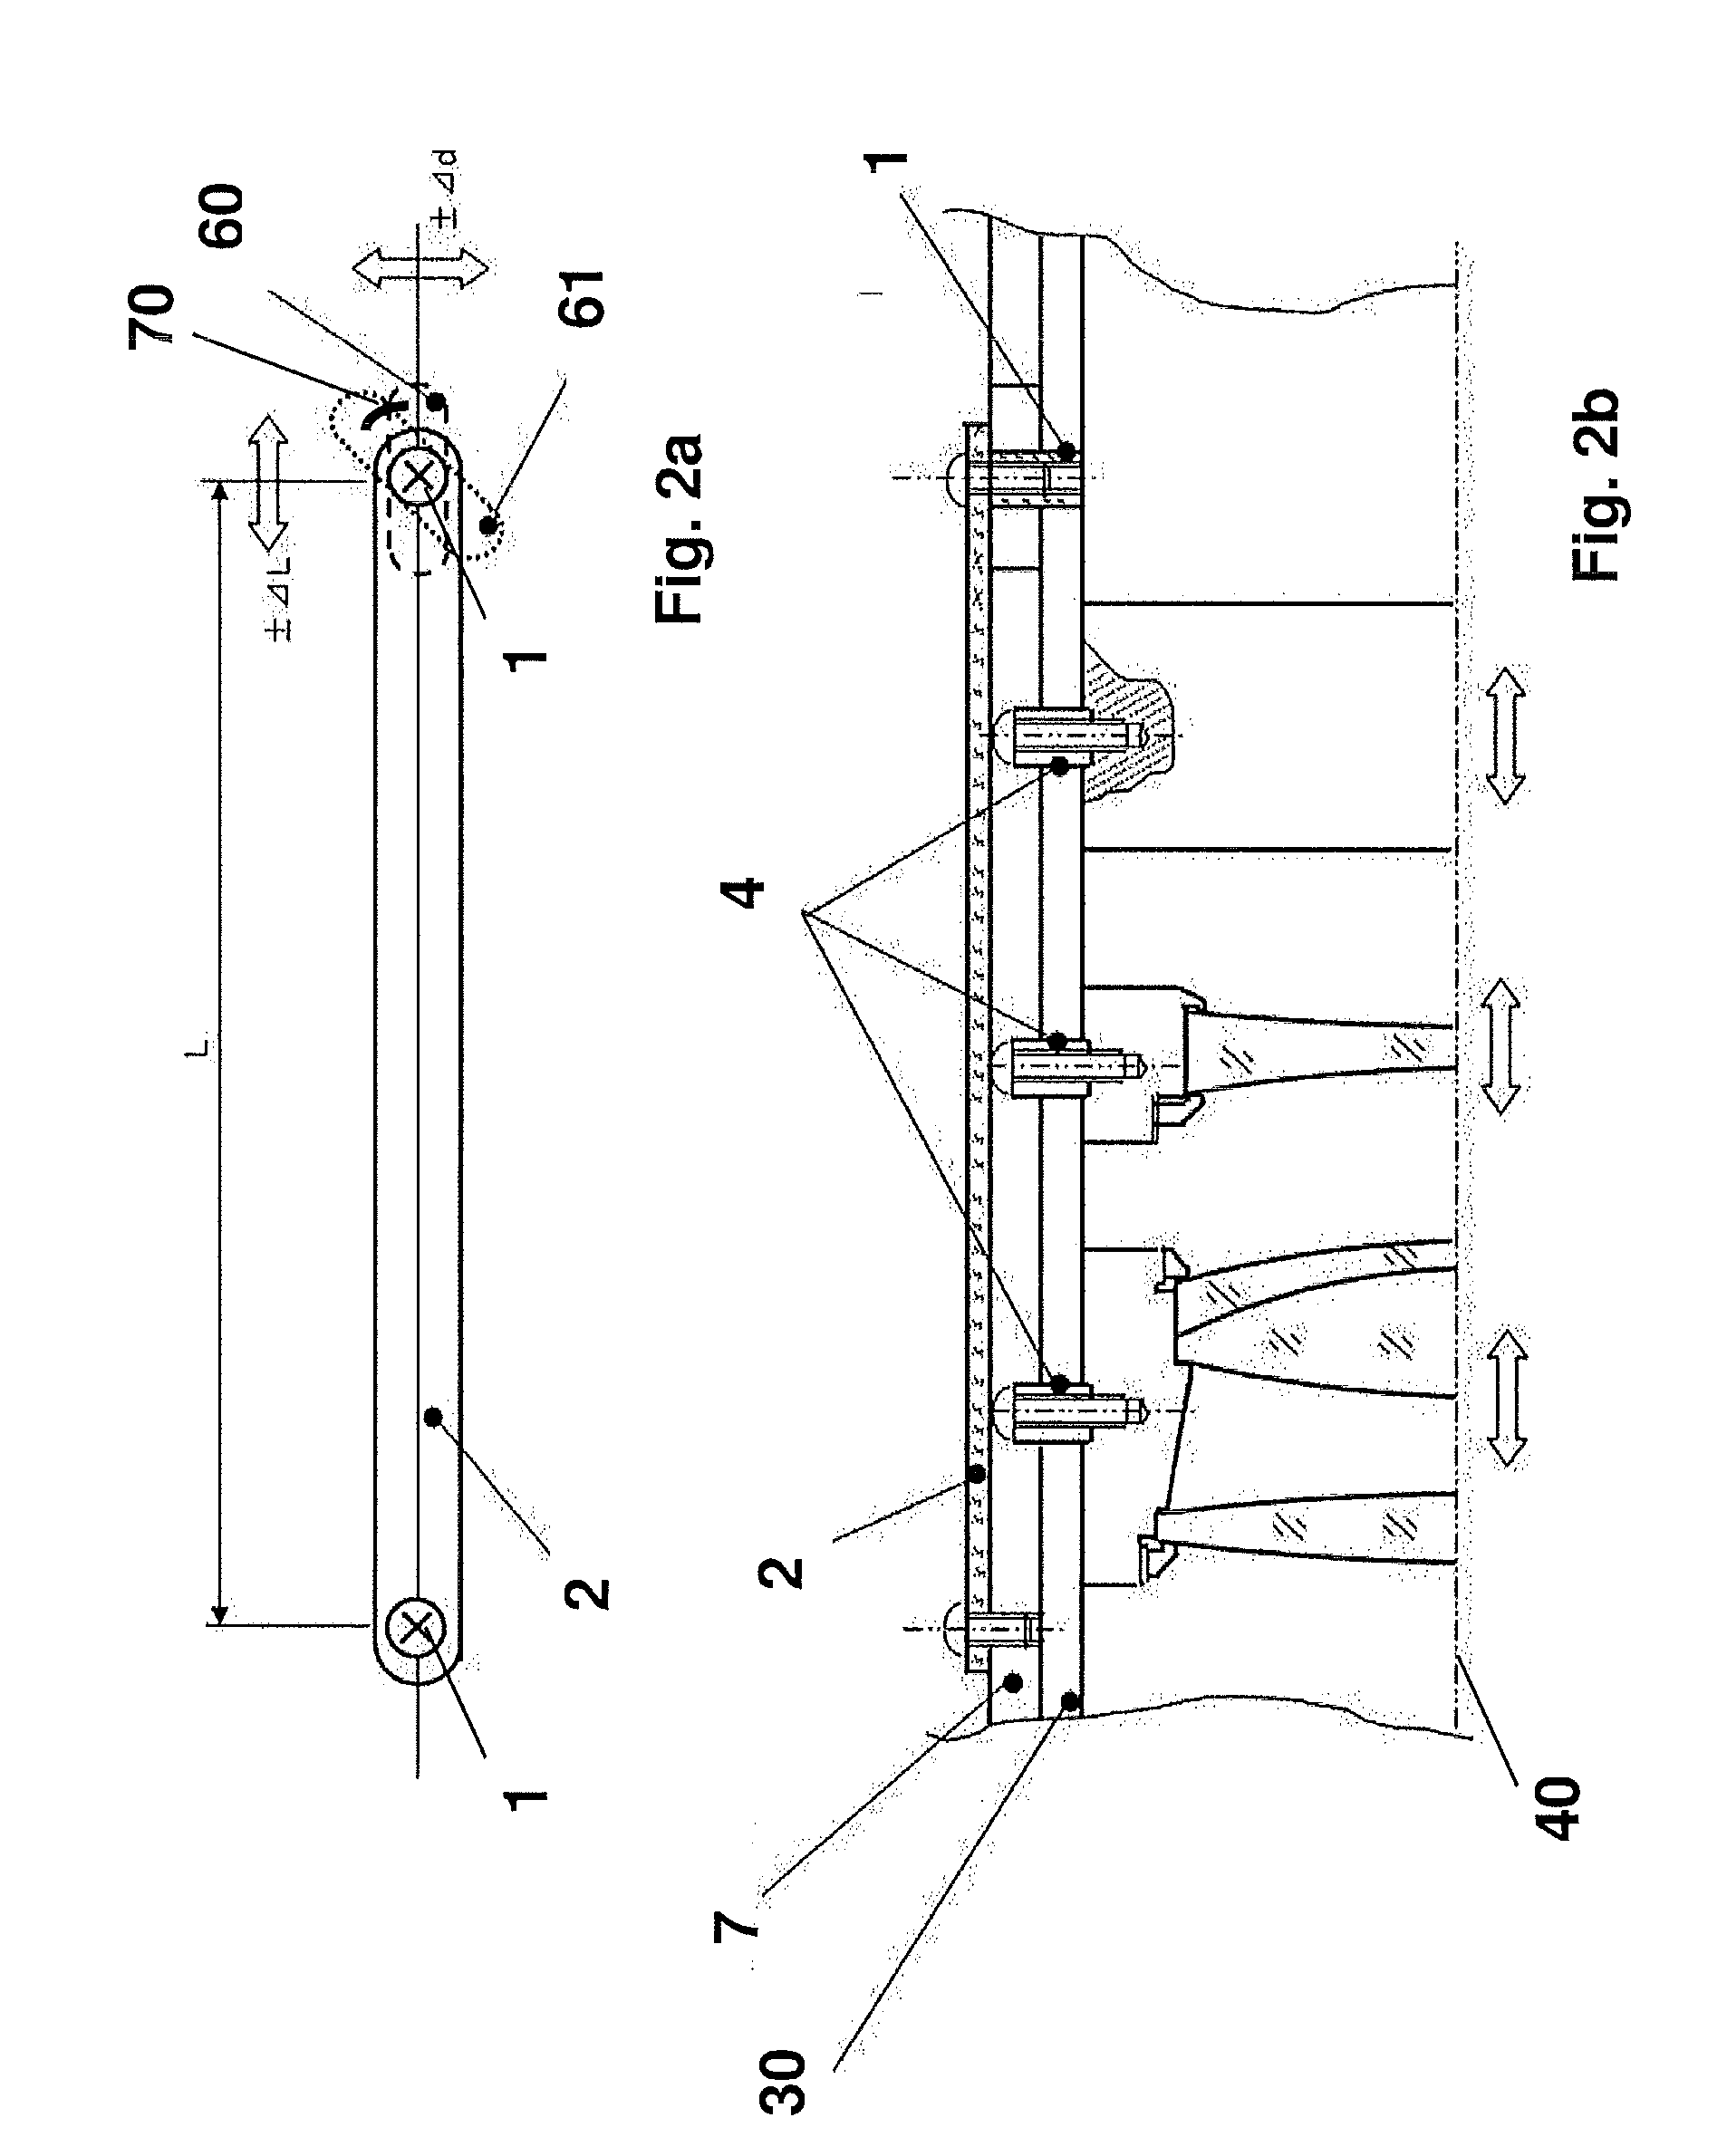 Structure and method for compensating temperature dependent magnification and focus change